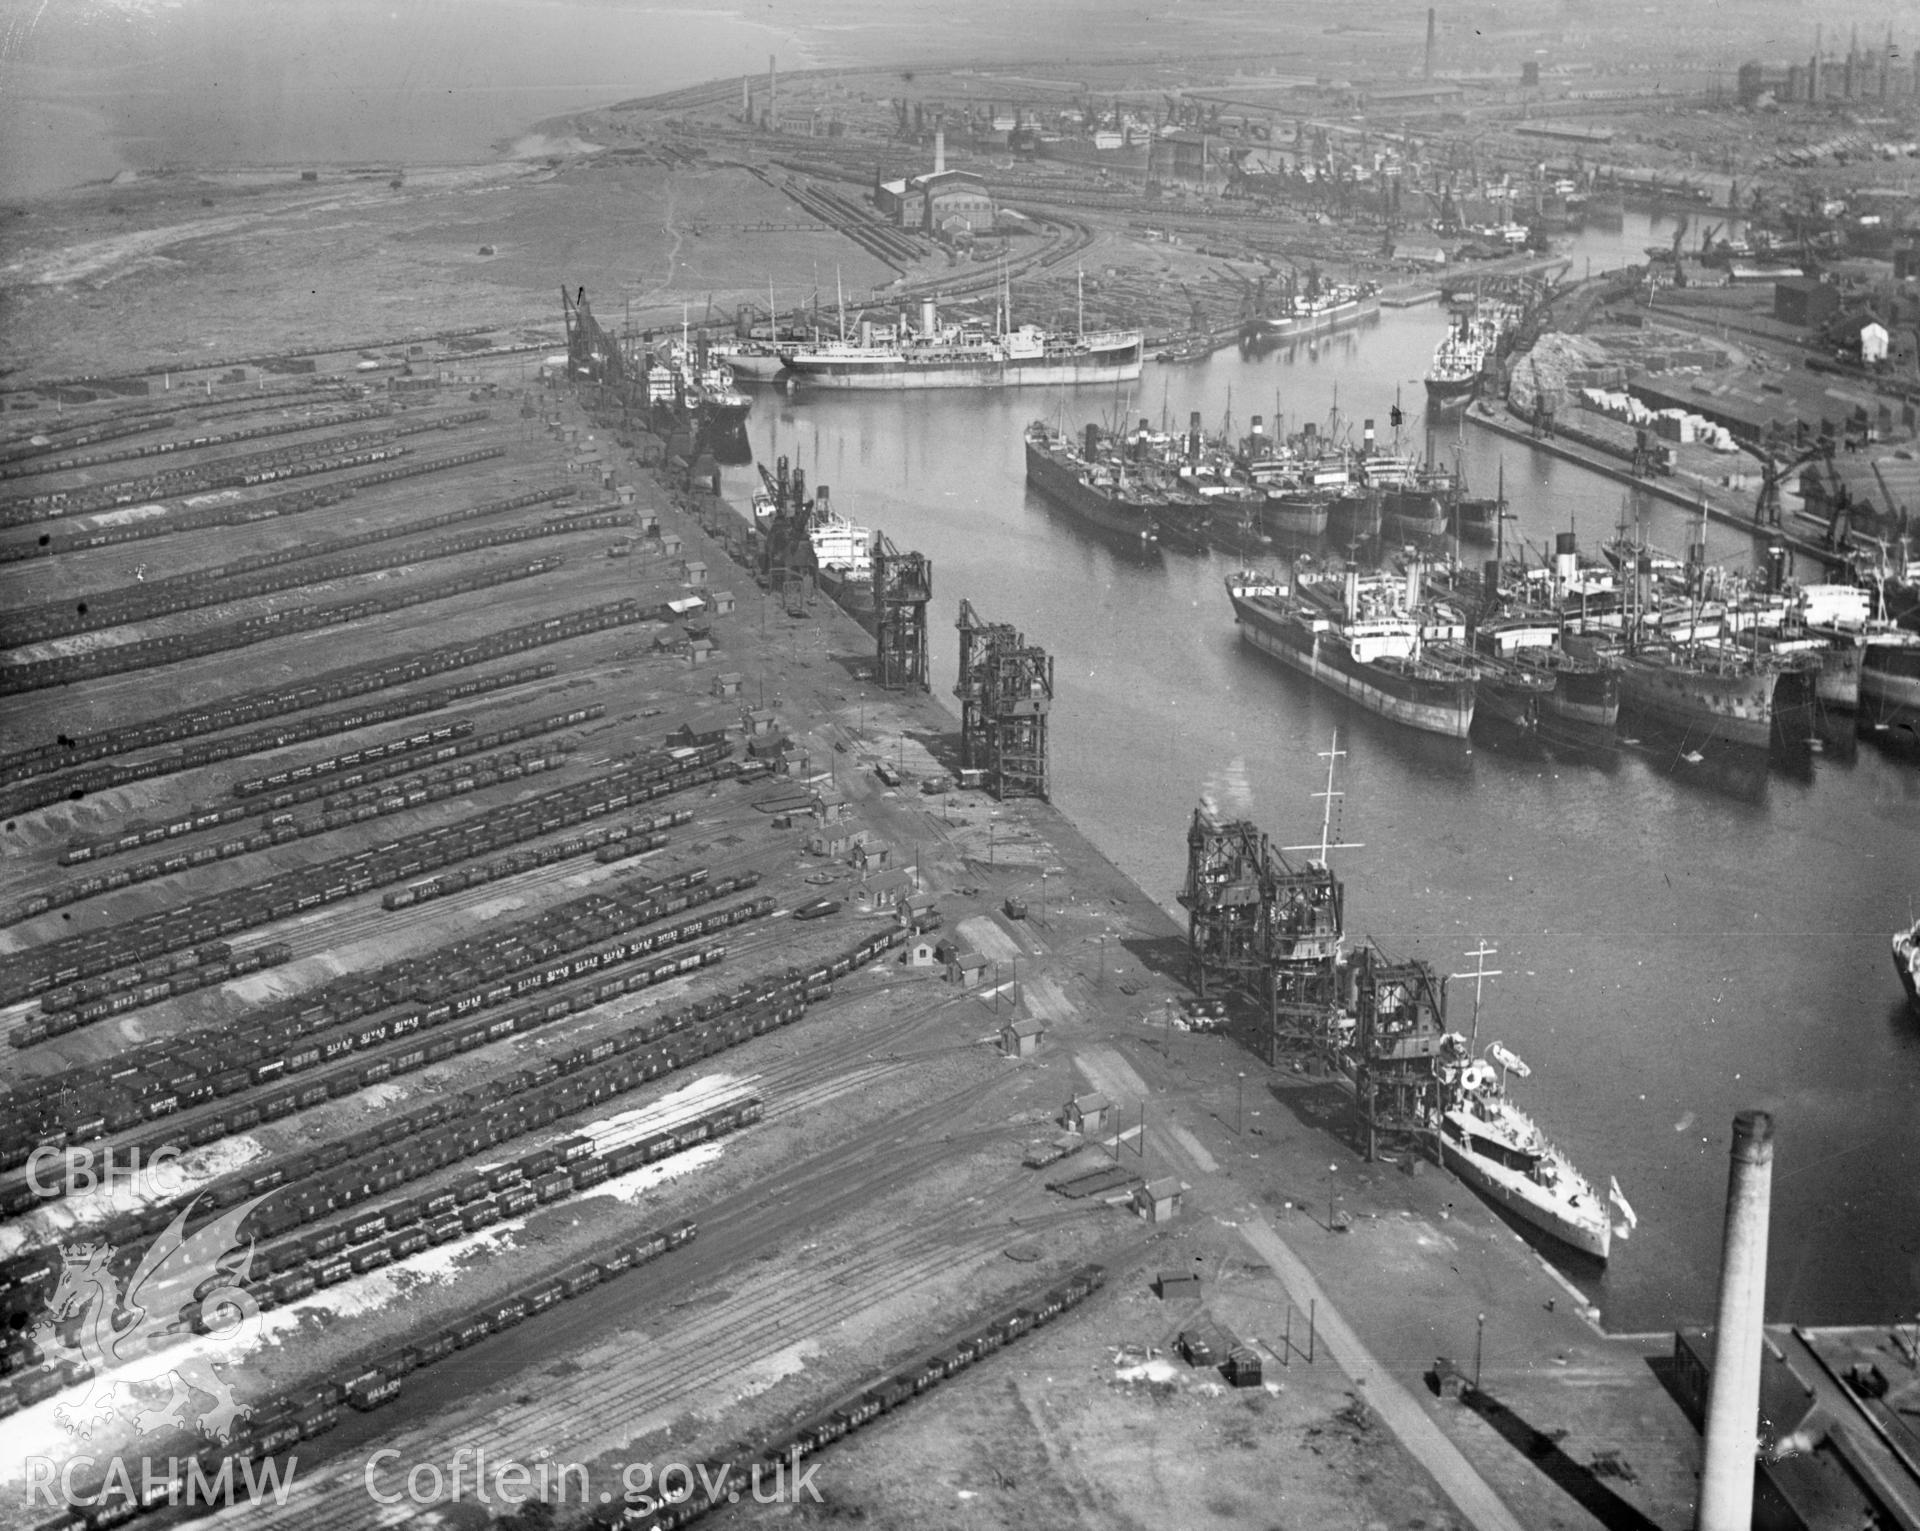 View of Queens Dock, Cardiff showing railway sidings, oblique aerial view. 5?x4? black and white glass plate negative.